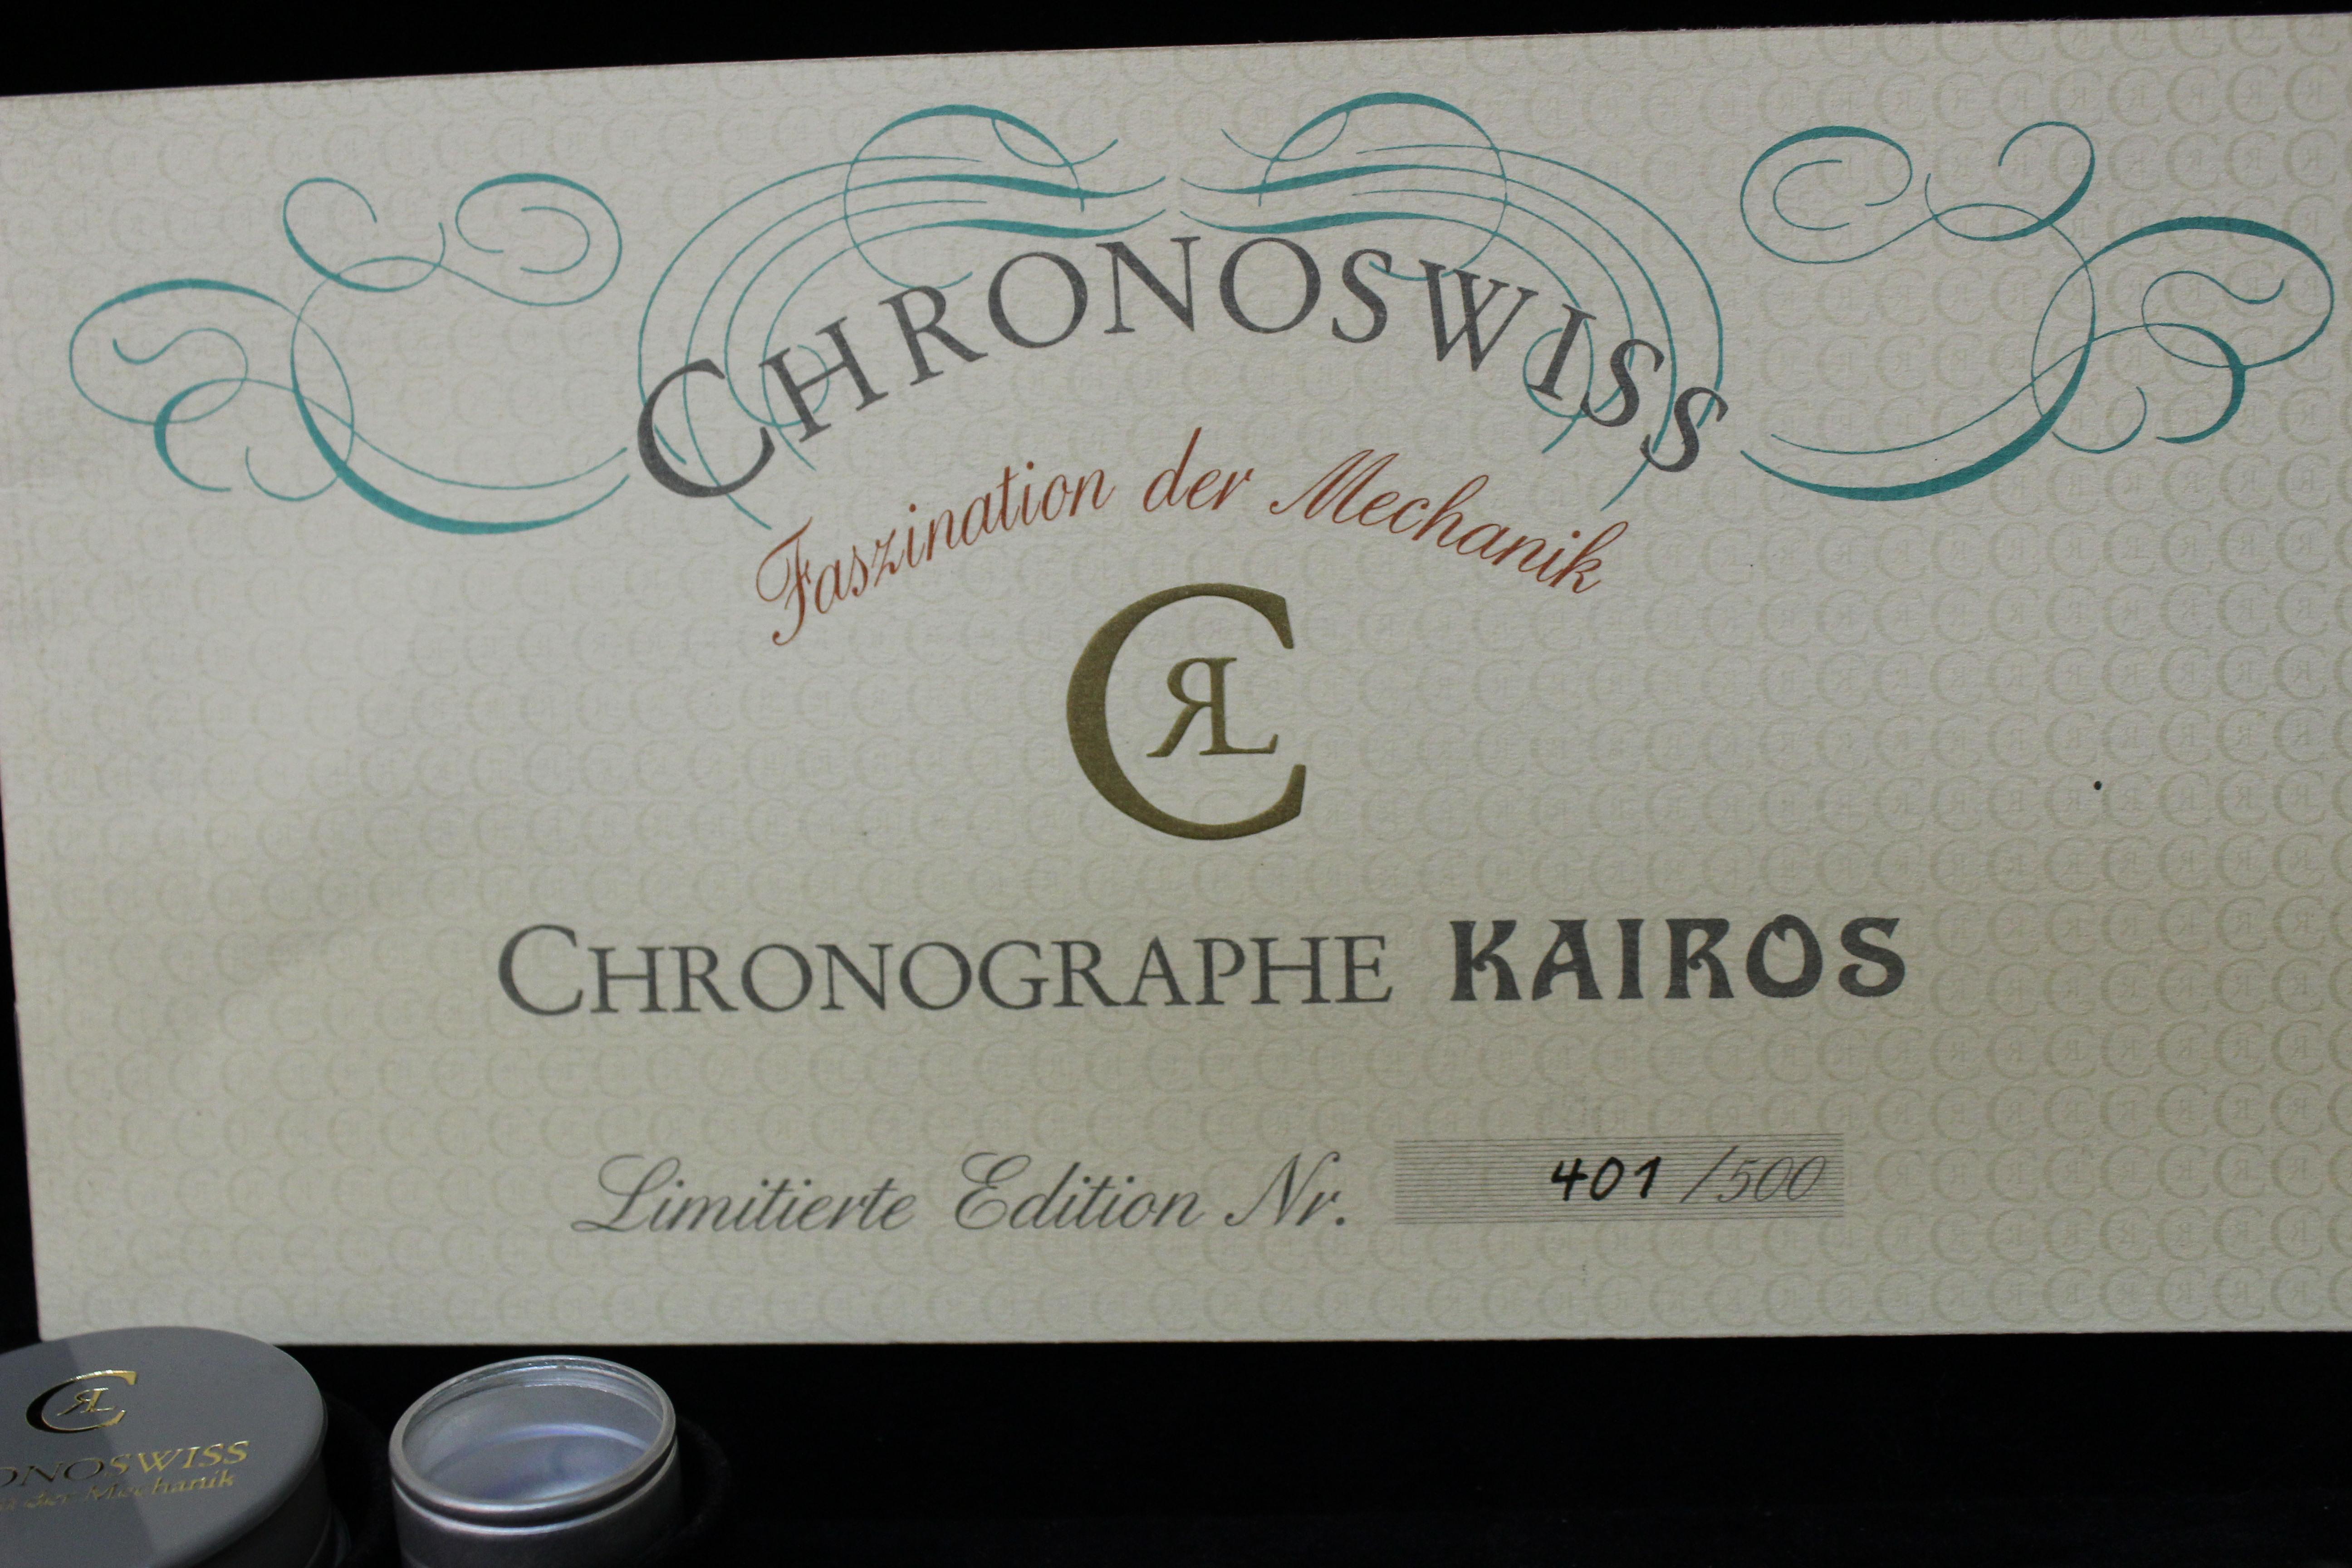 Chronoswiss Kairos Limited Edition 401/500, 18 Karat Gold Chronograph In Excellent Condition For Sale In firenze, IT